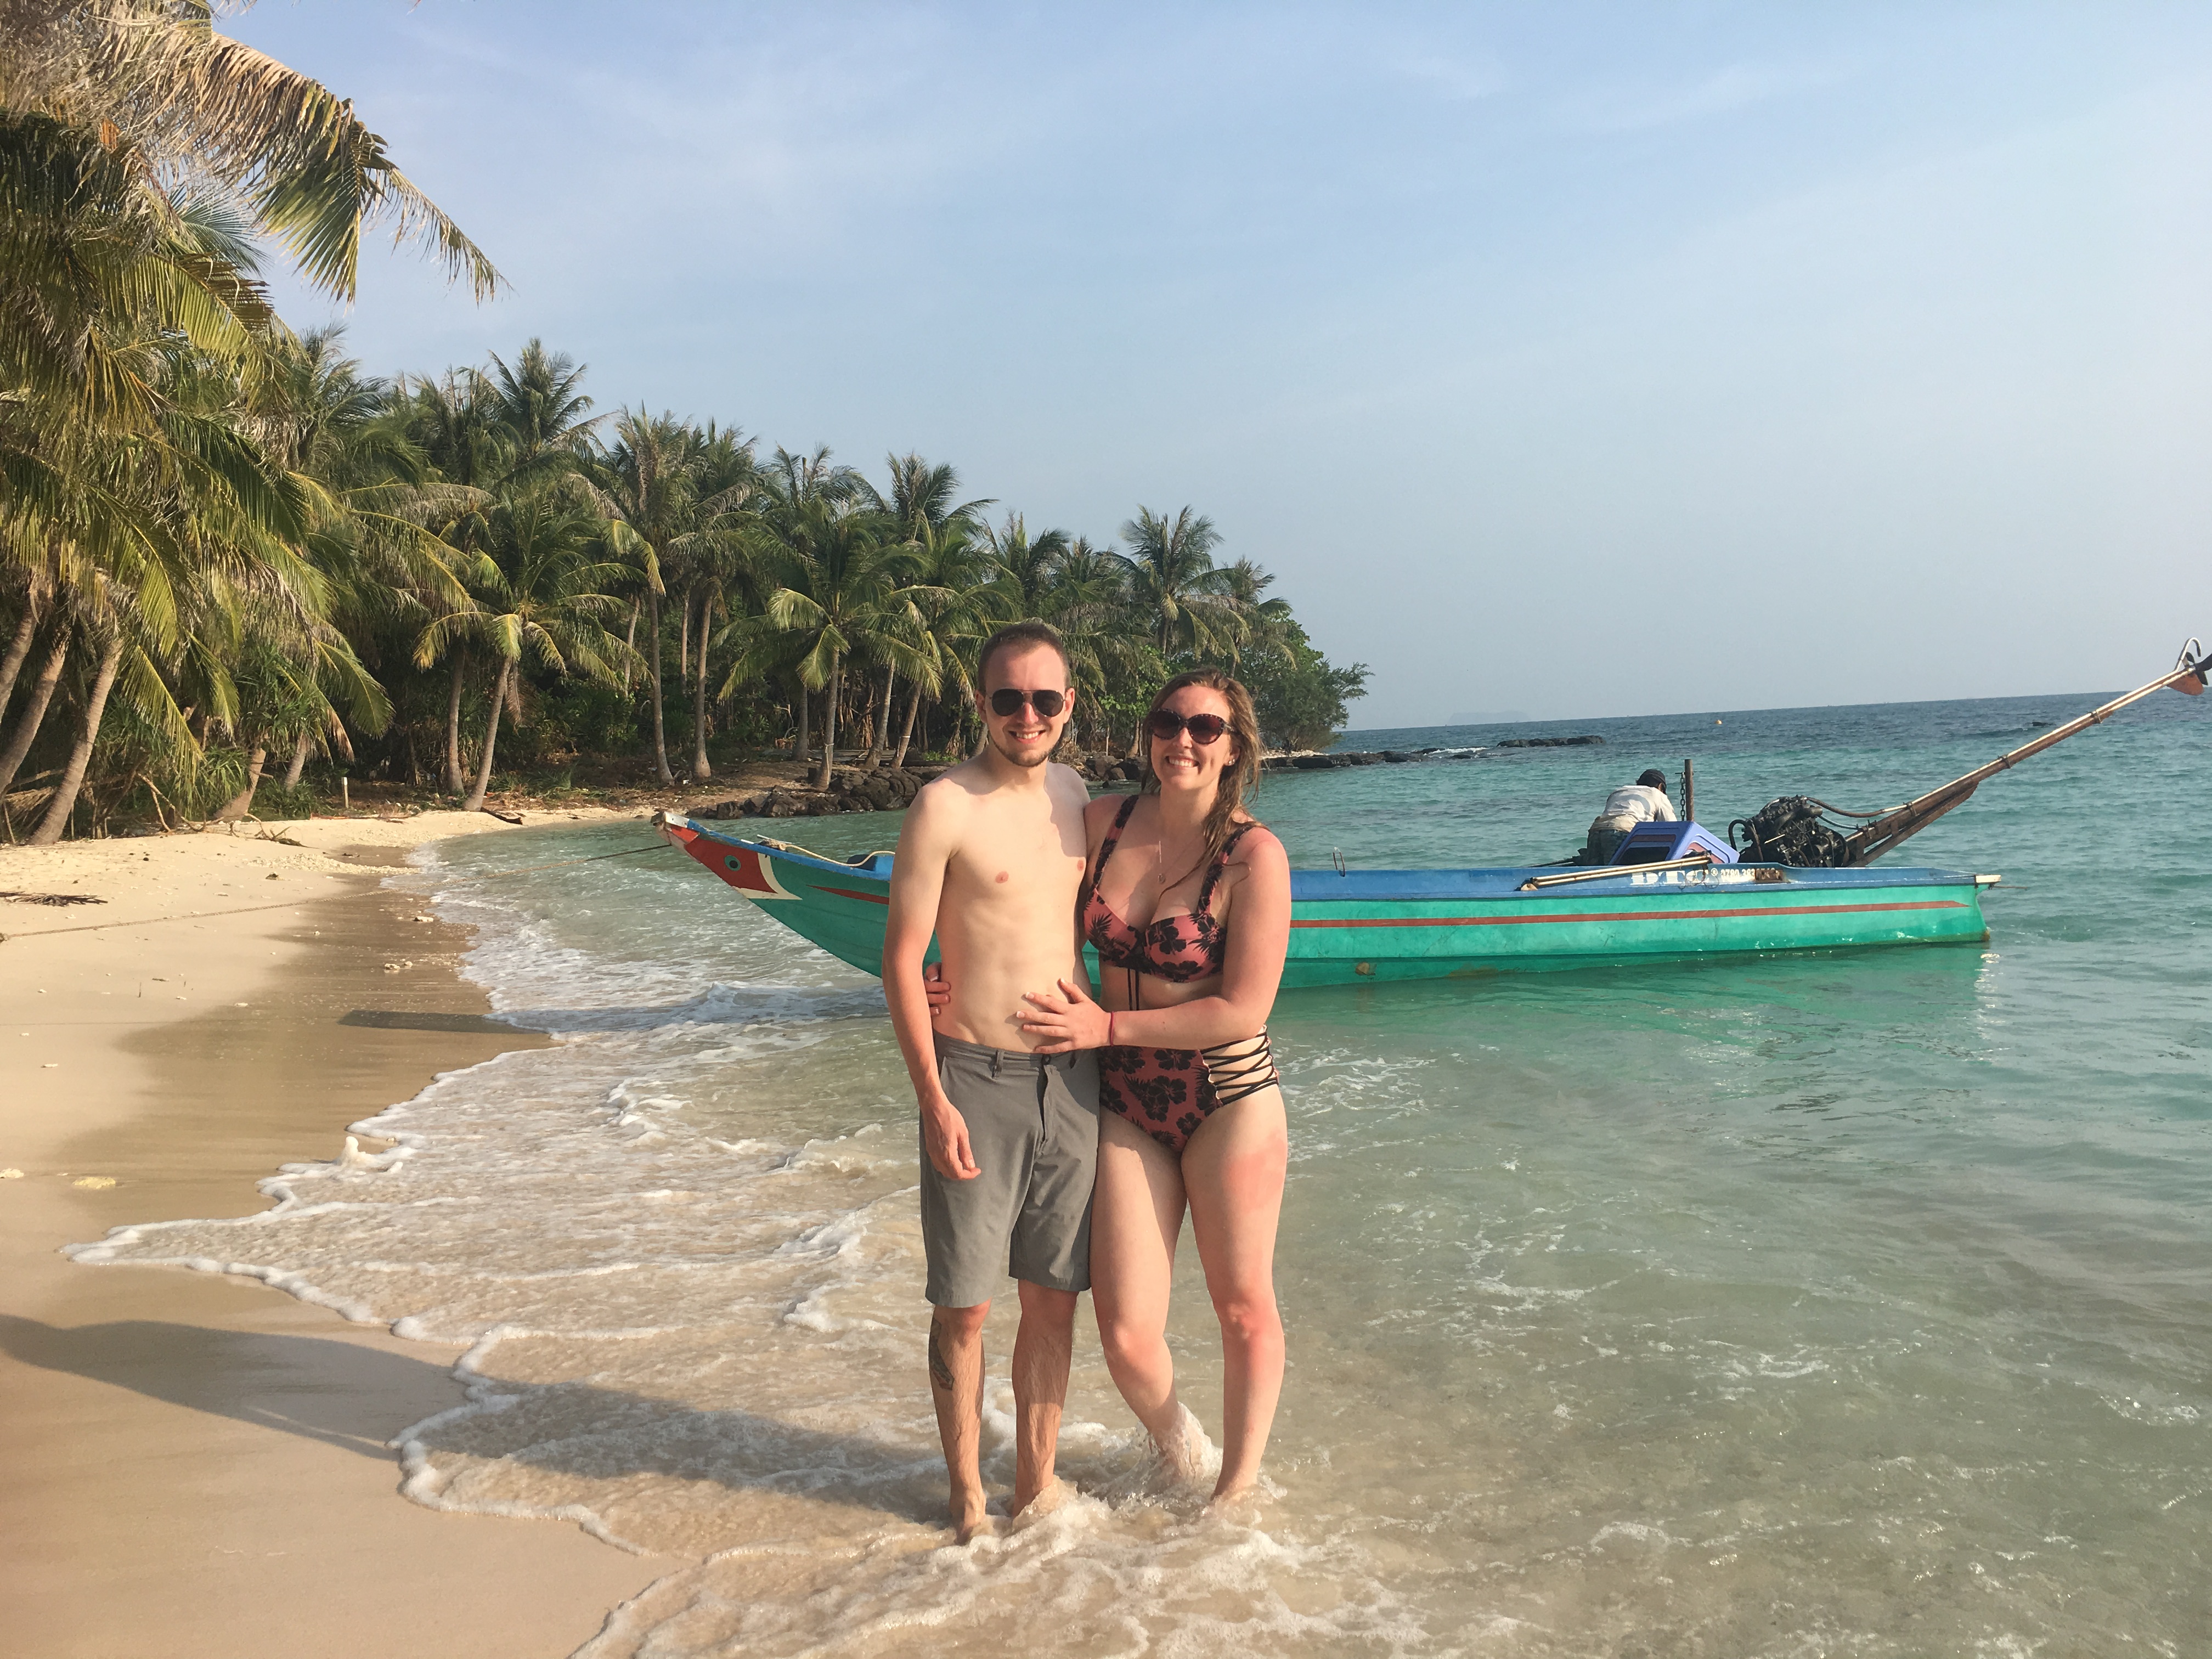 Ben and Erinn at the An Thoi islands of Phu Quoc, Vietnam.